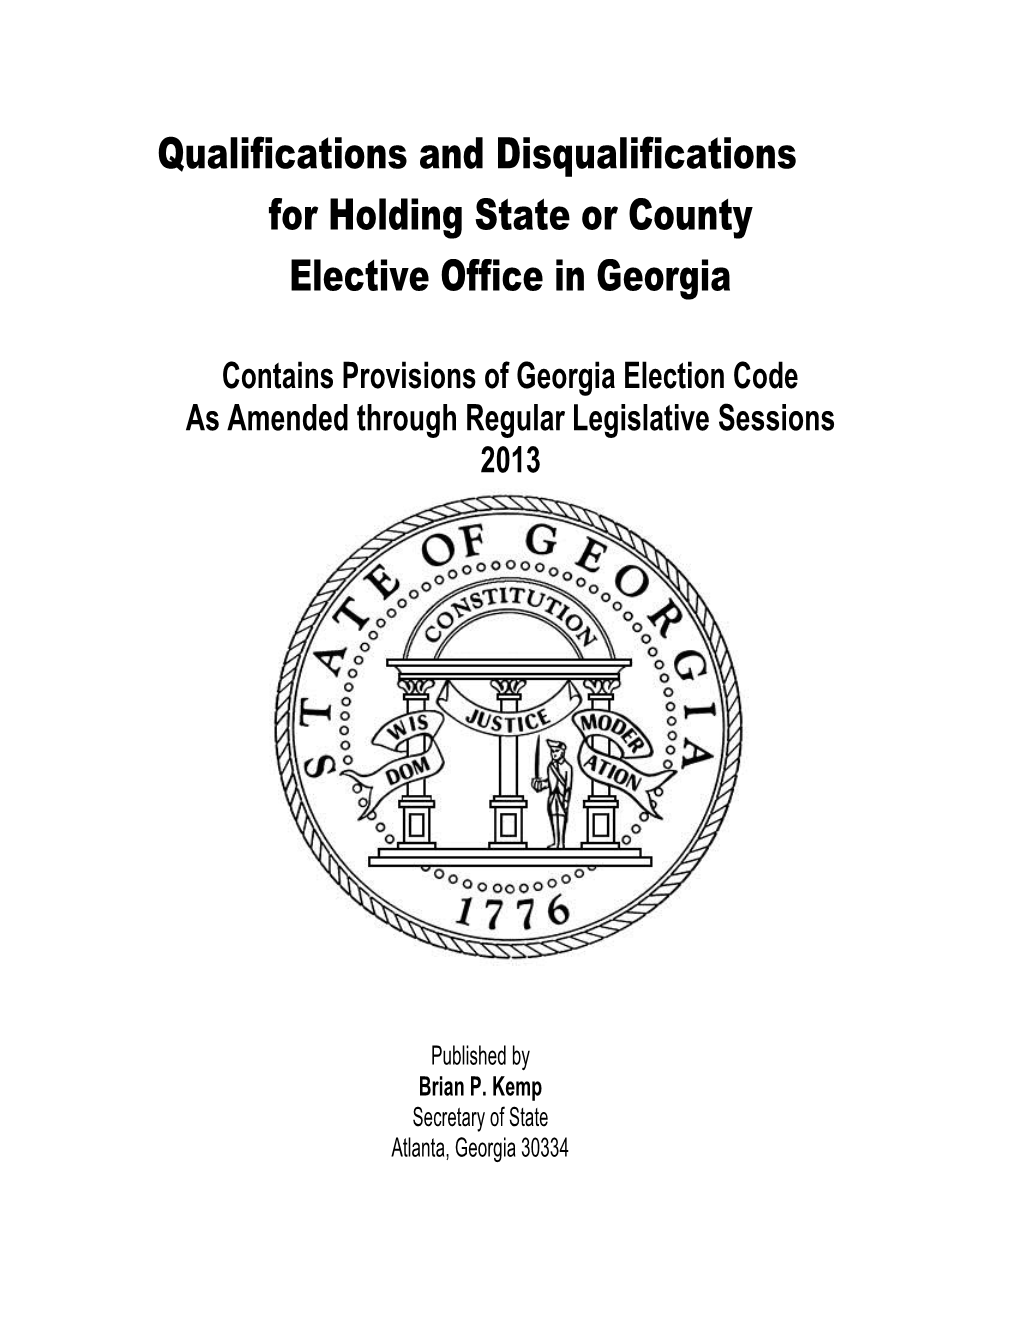 Qualifications and Disqualifications for Holding Elective Office in Georgia